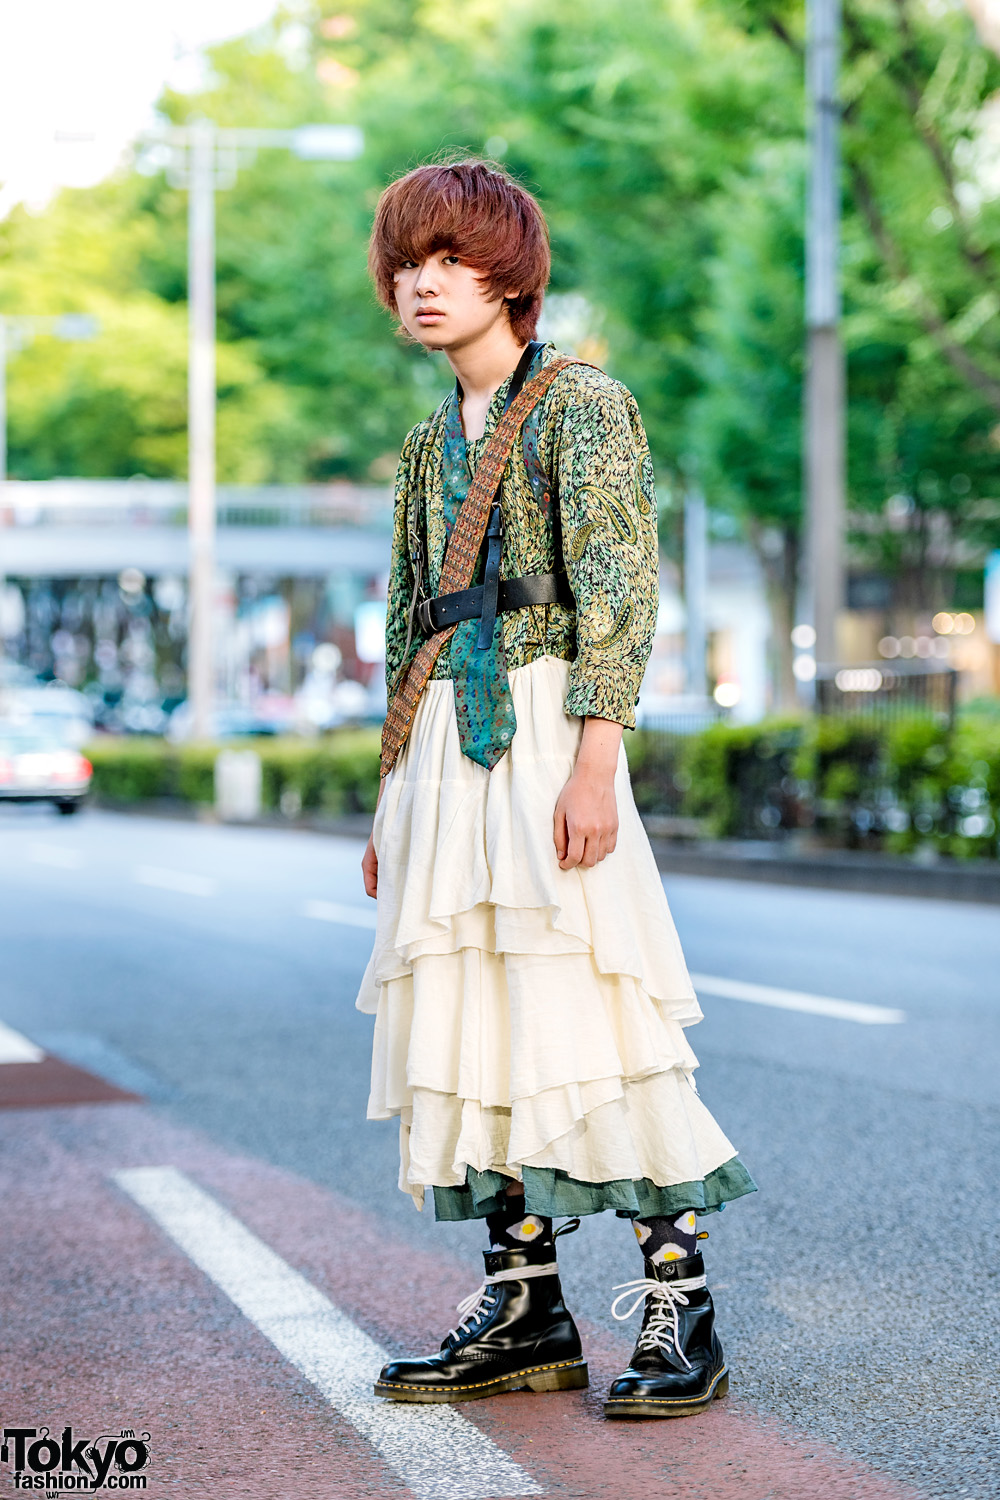 Double Neck Ties & Vintage Fashion in Harajuku w/ Leather Harness, Print Shirt, Tiered Skirt & Dr. Martens Boots